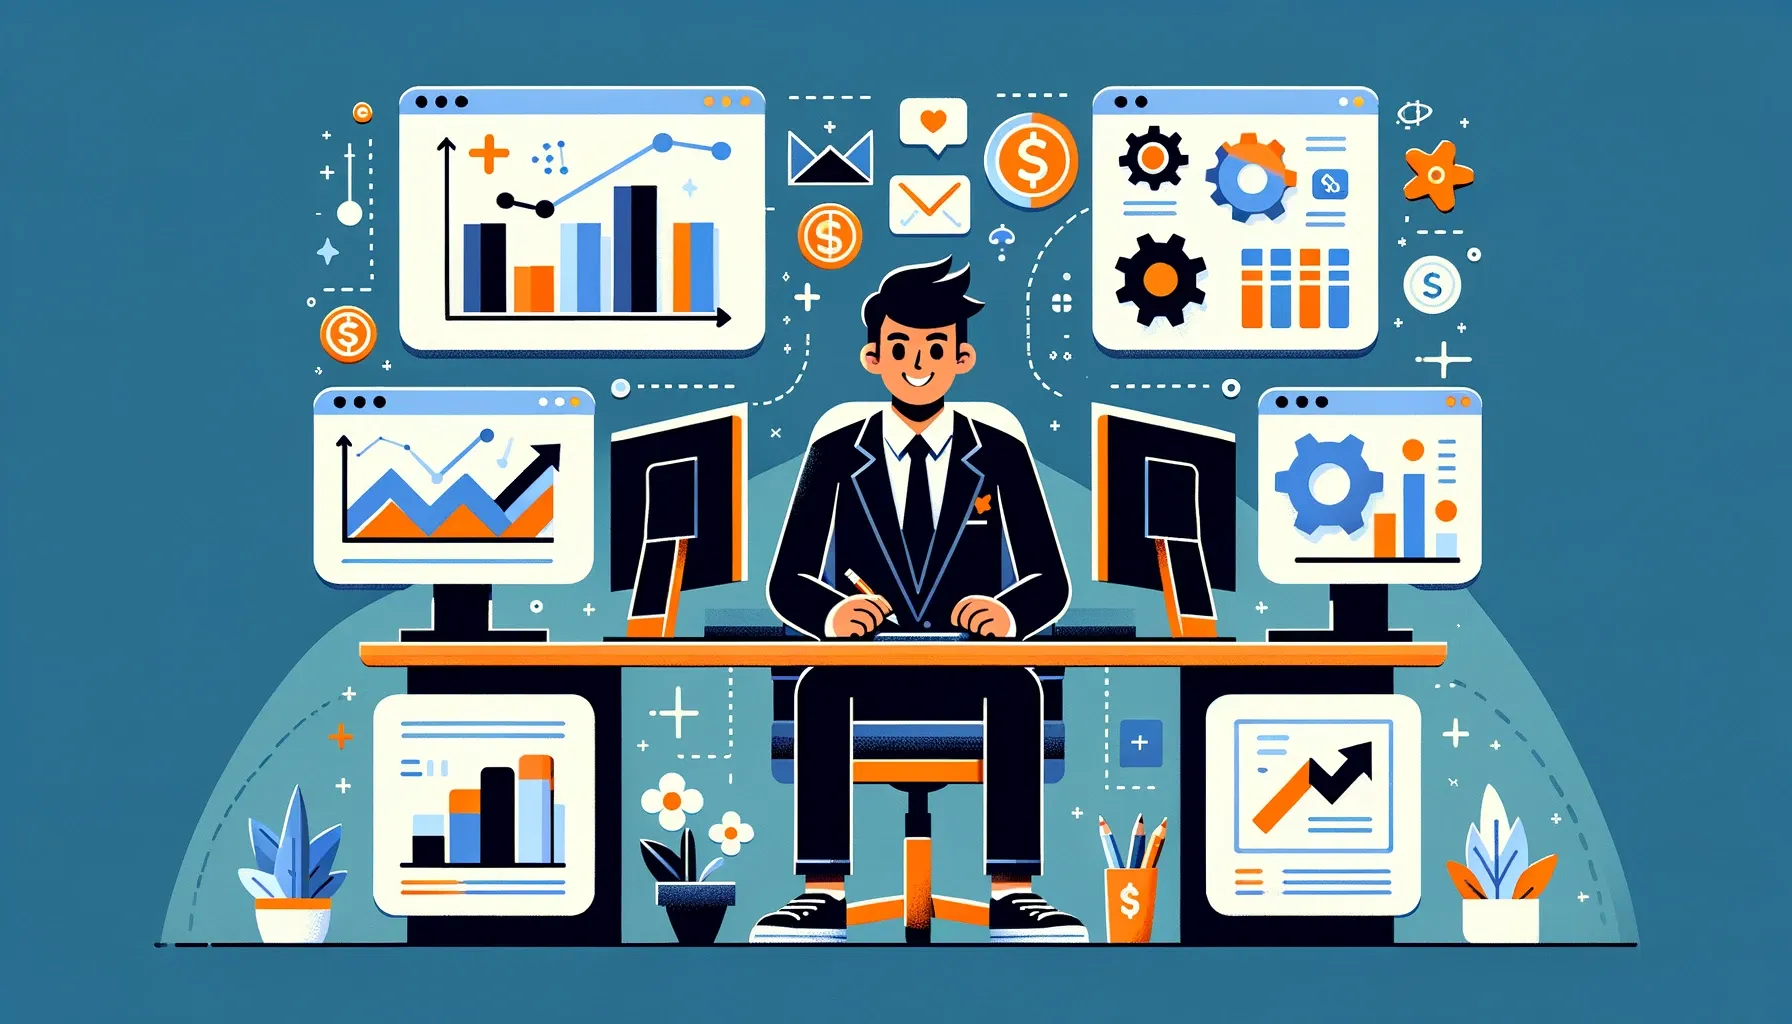 Cartoon of a businessman at a desk surrounded by multiple screens showing graphs, analytics, and business icons.